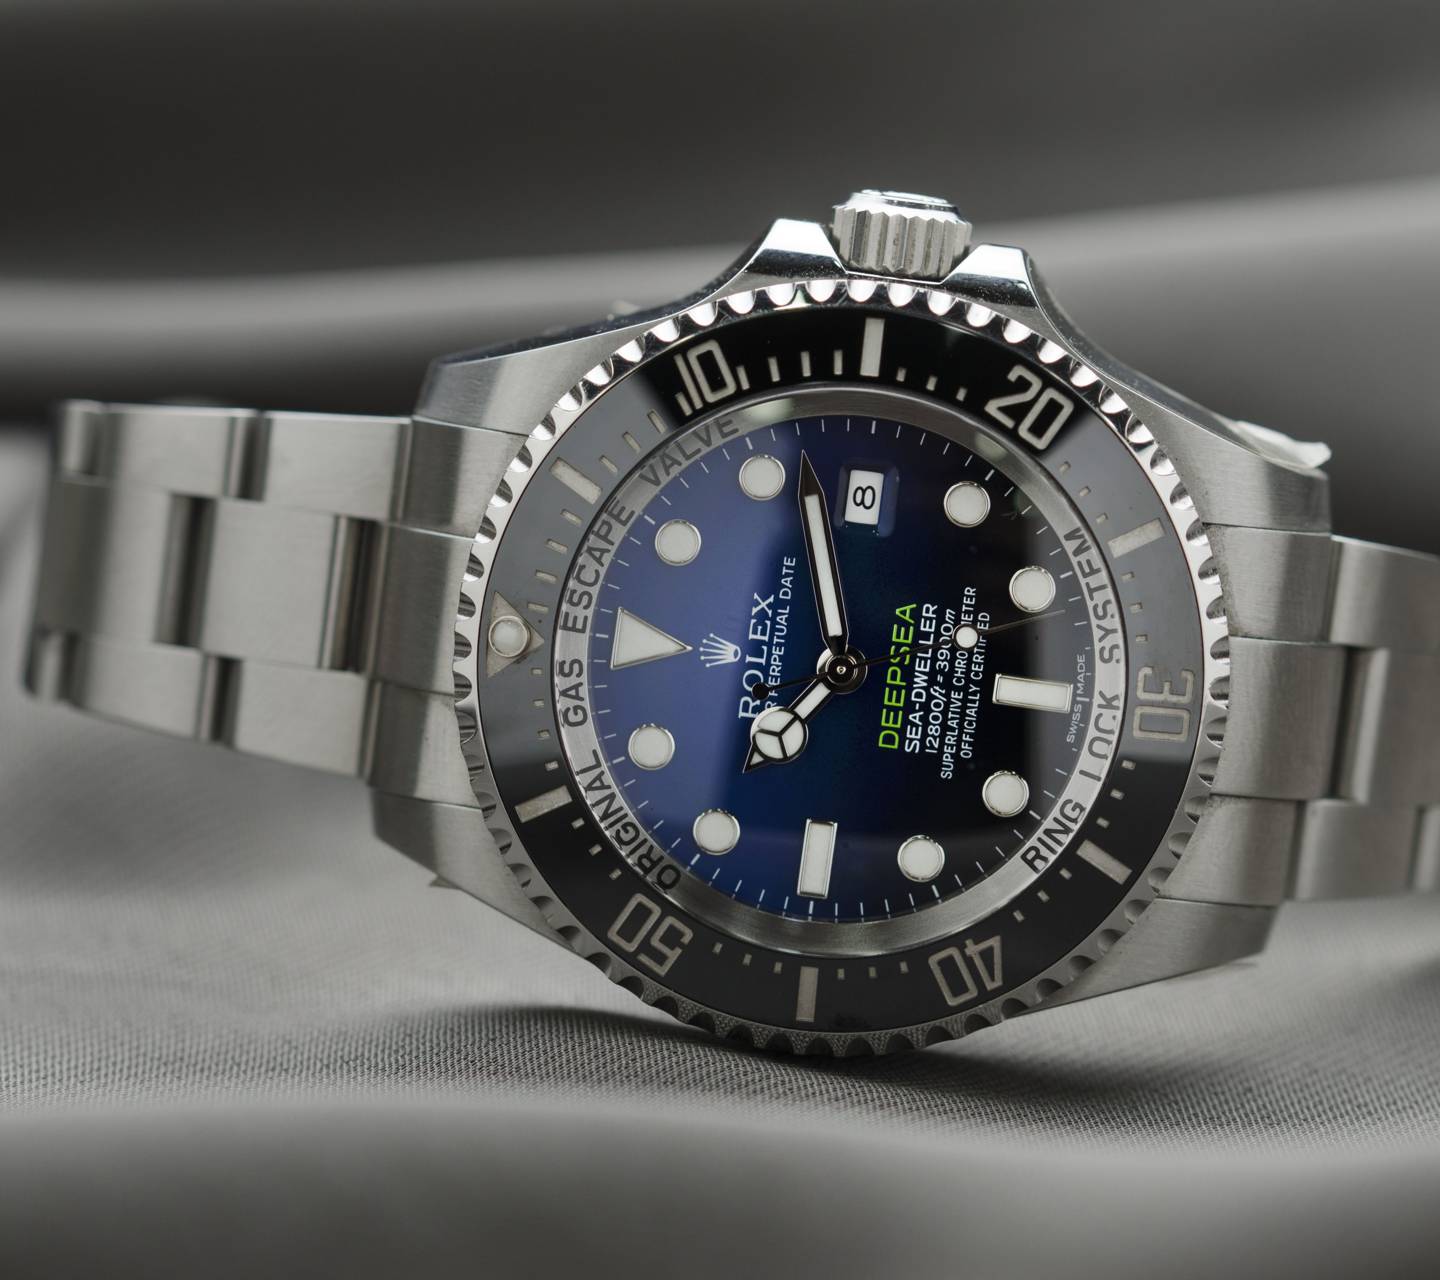 Download free rolex wallpaper for your mobile phone